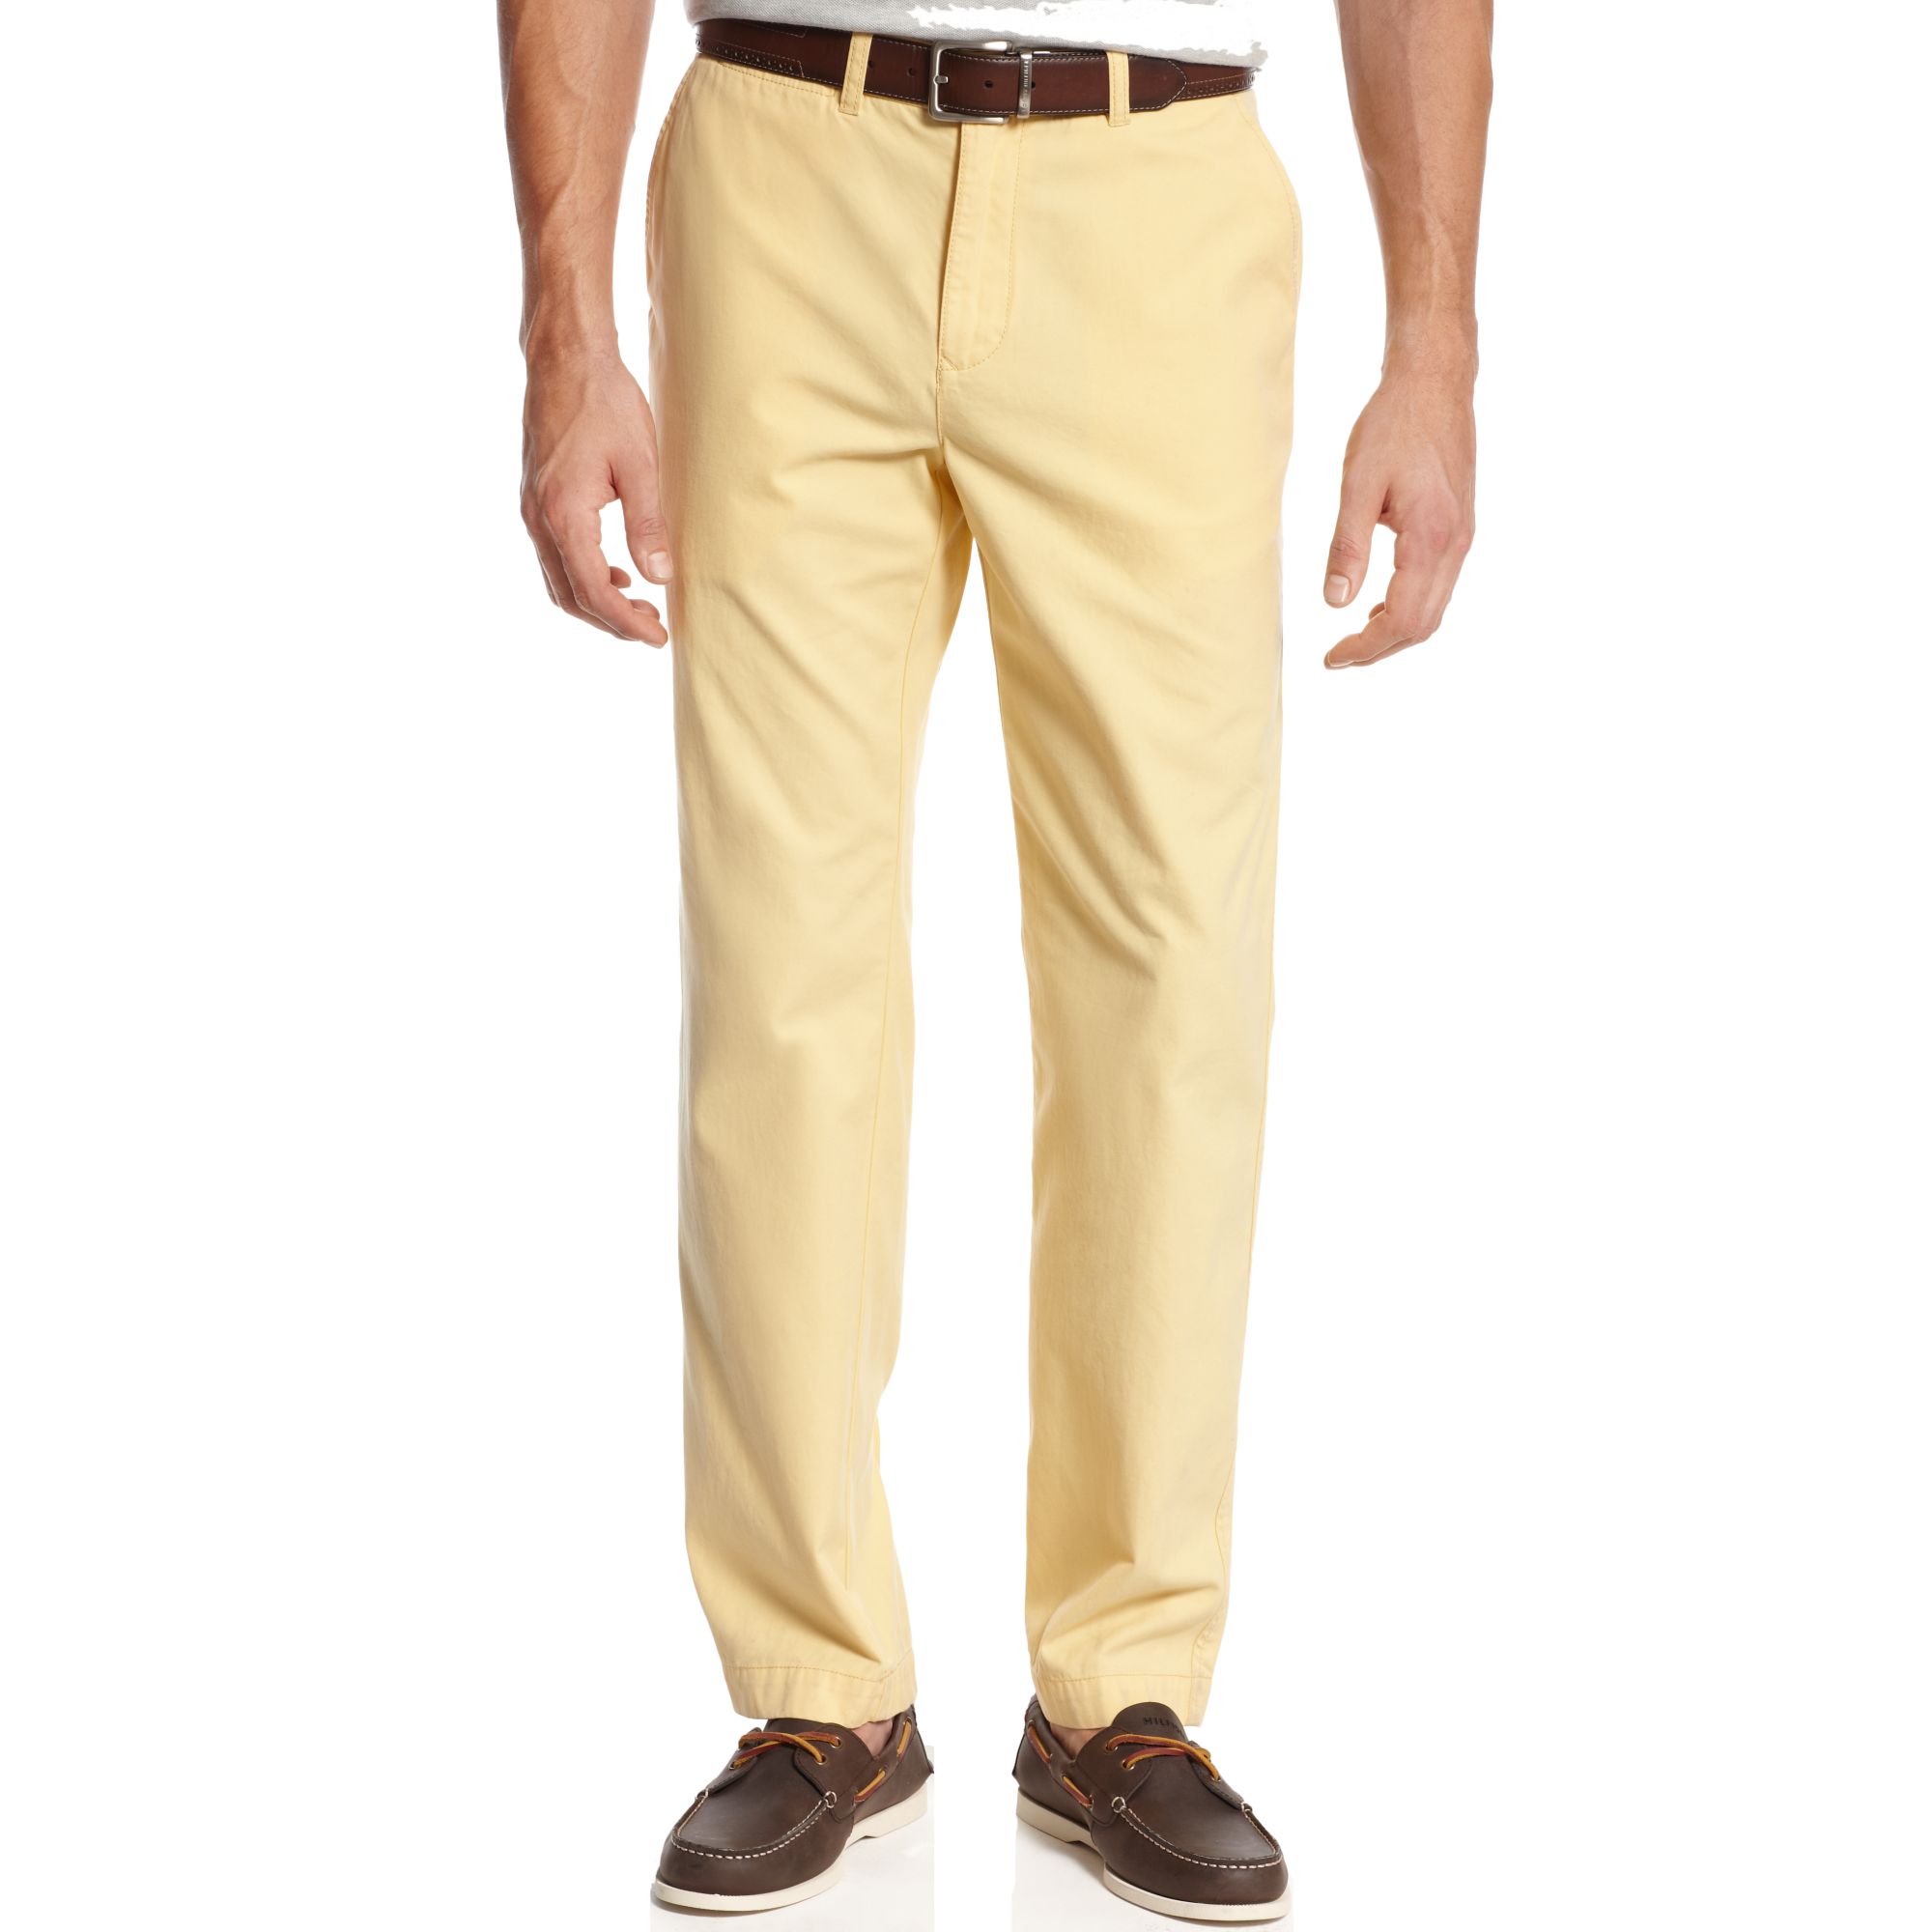 Lyst - Tommy Hilfiger Slim Fit Graduate Chino Pants in Natural for Men